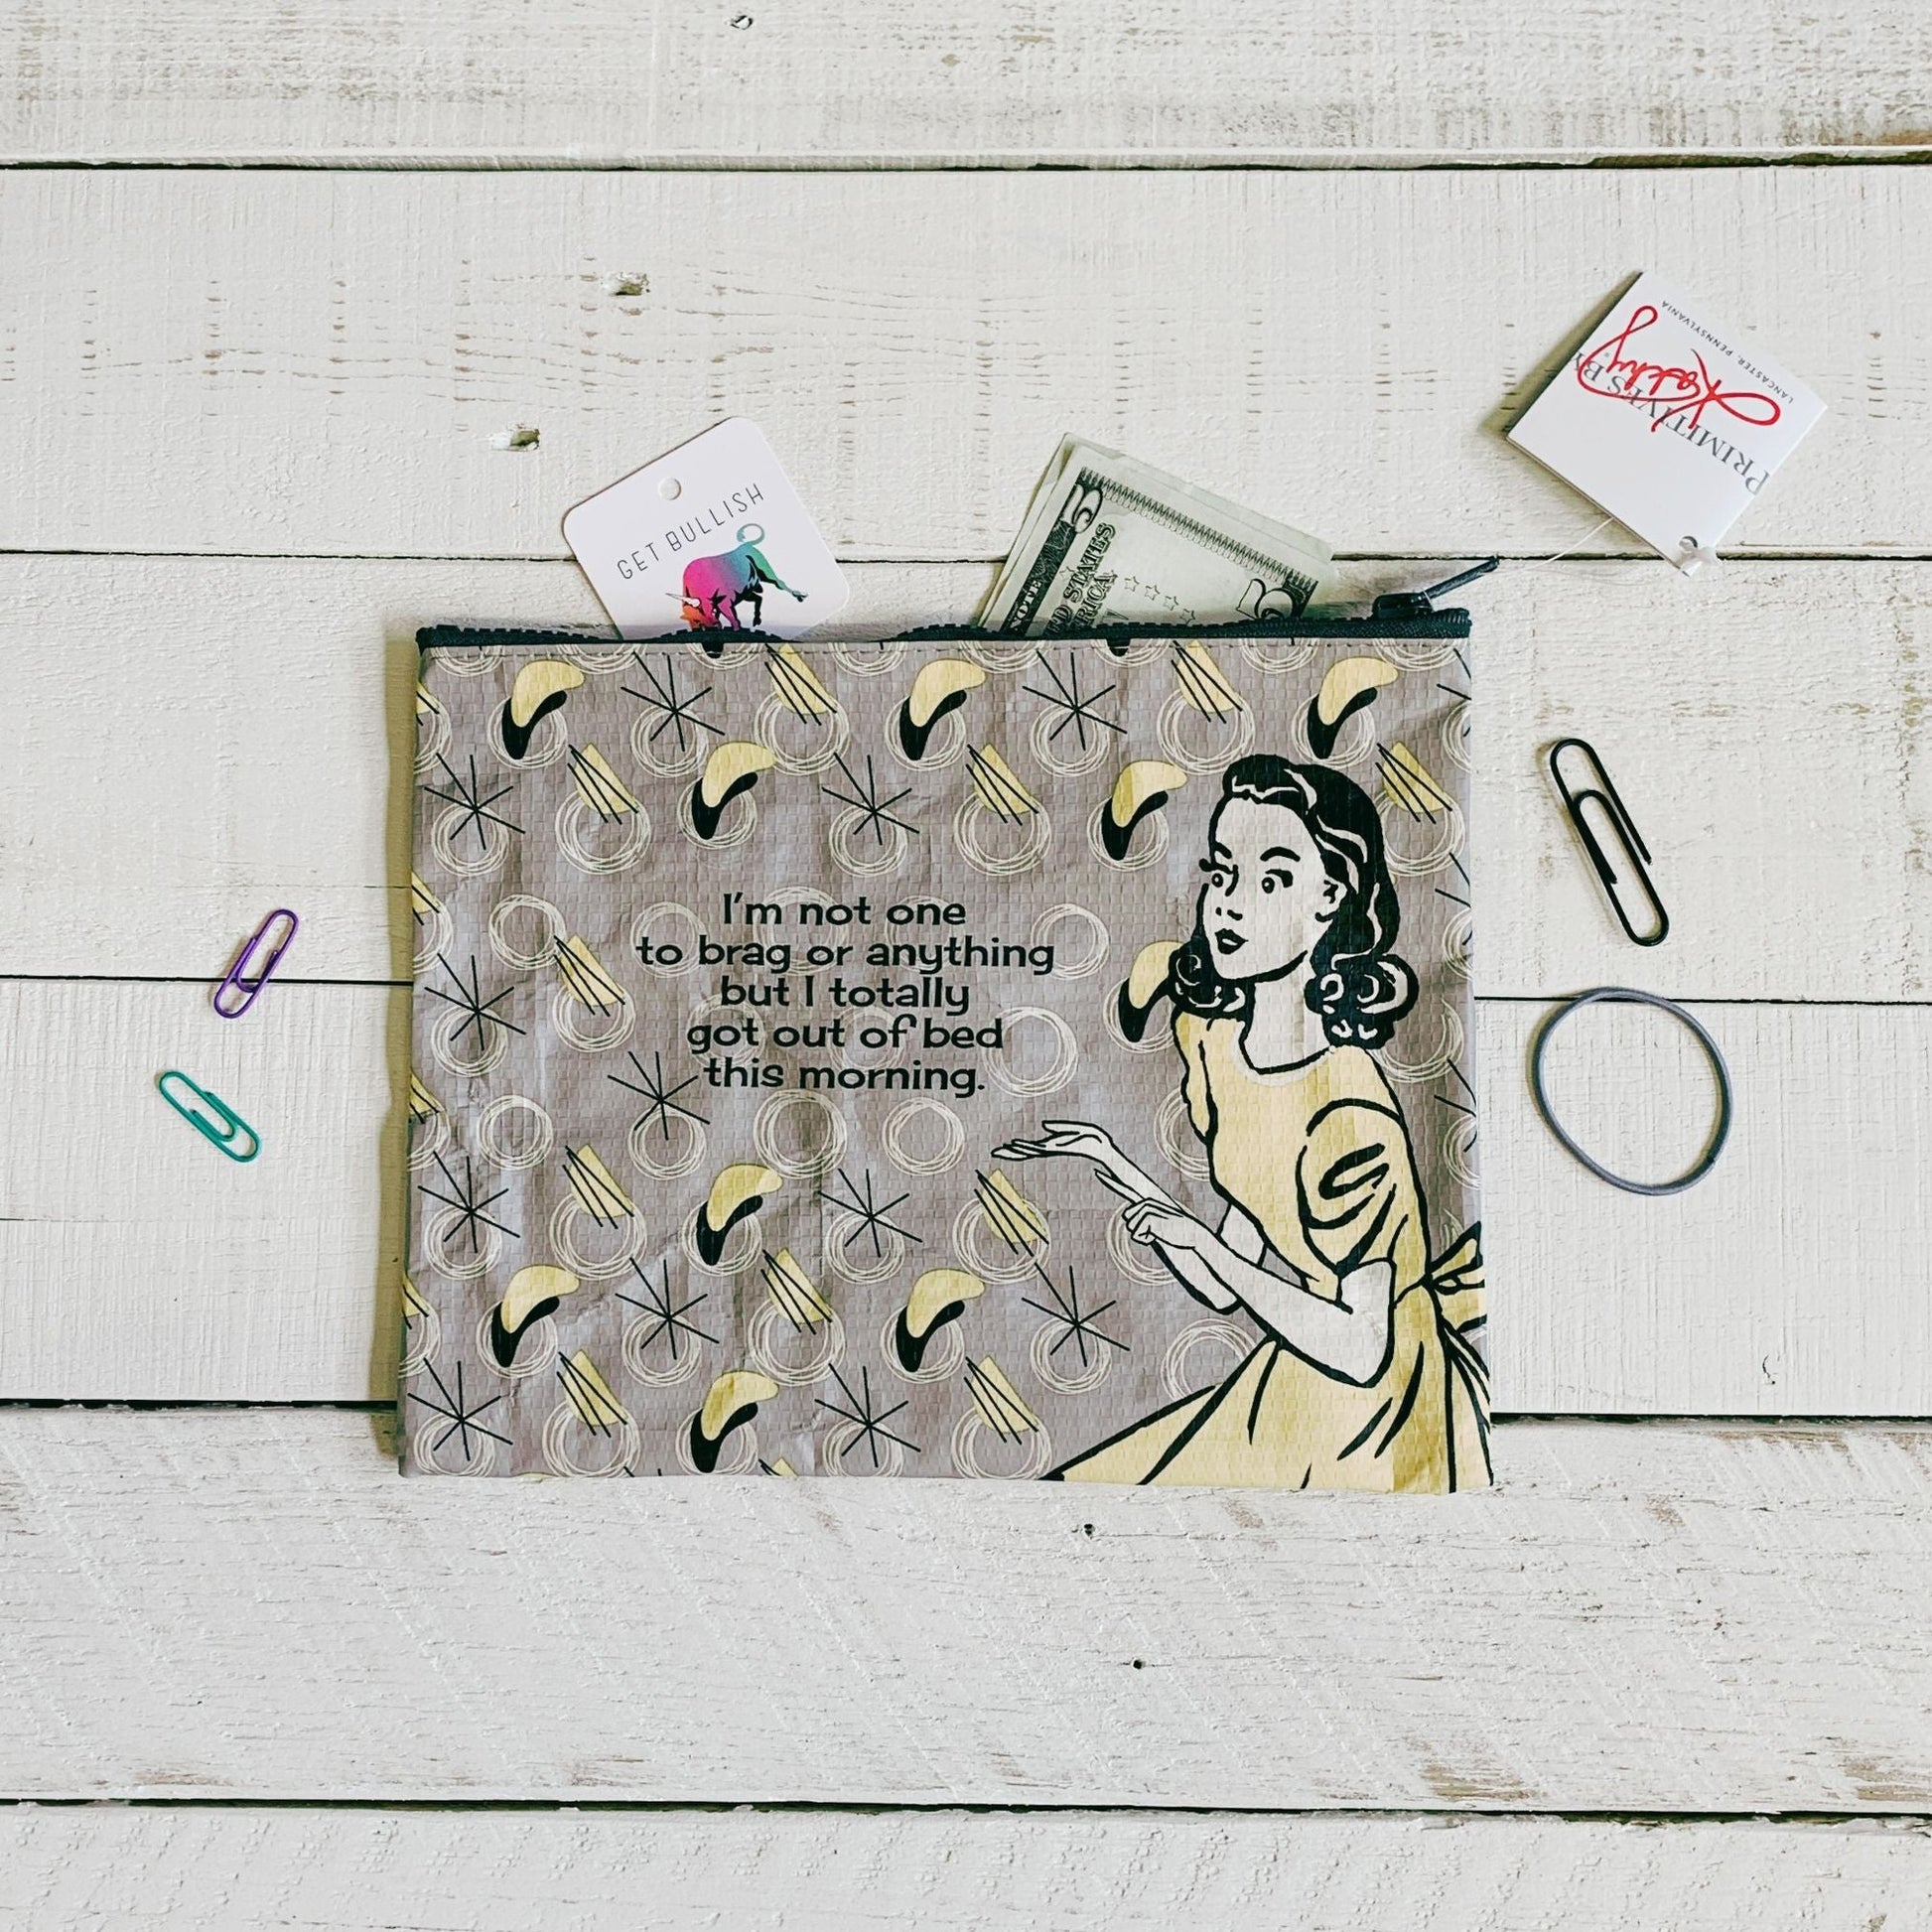 Maybe Money Can't Buy Happiness But I'd Rather Cry In A Mansion Recycled Material Coin Purse Pouch | 5.25" x 4"